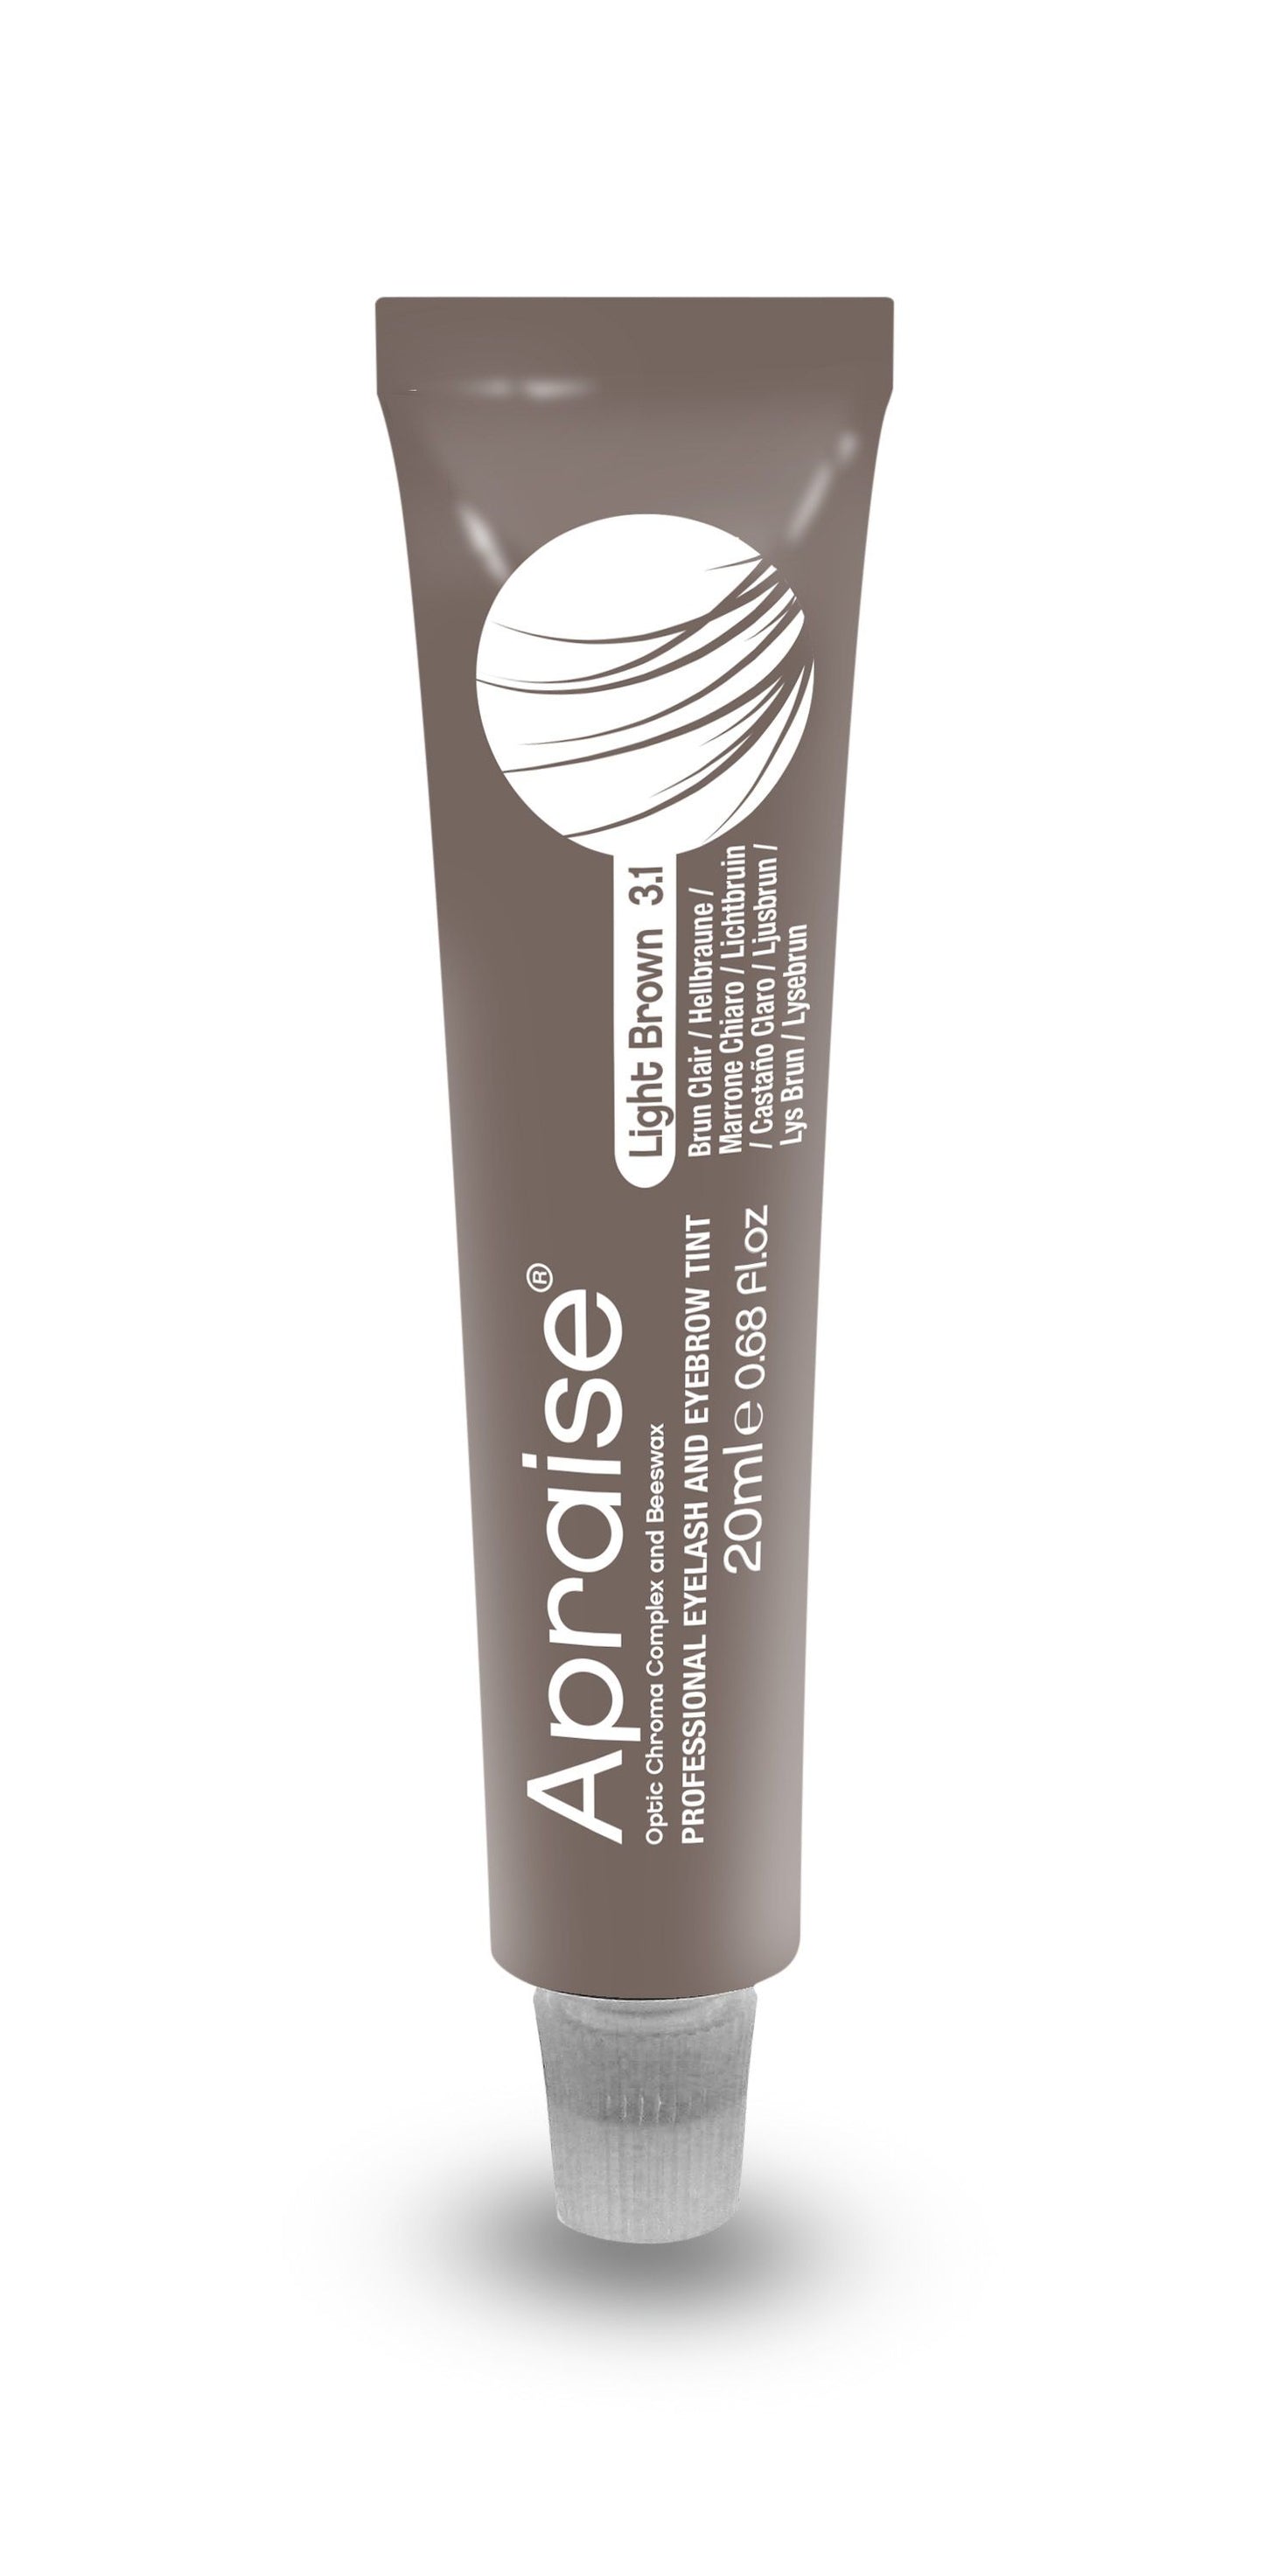 Apraise Professional lash and brow tint